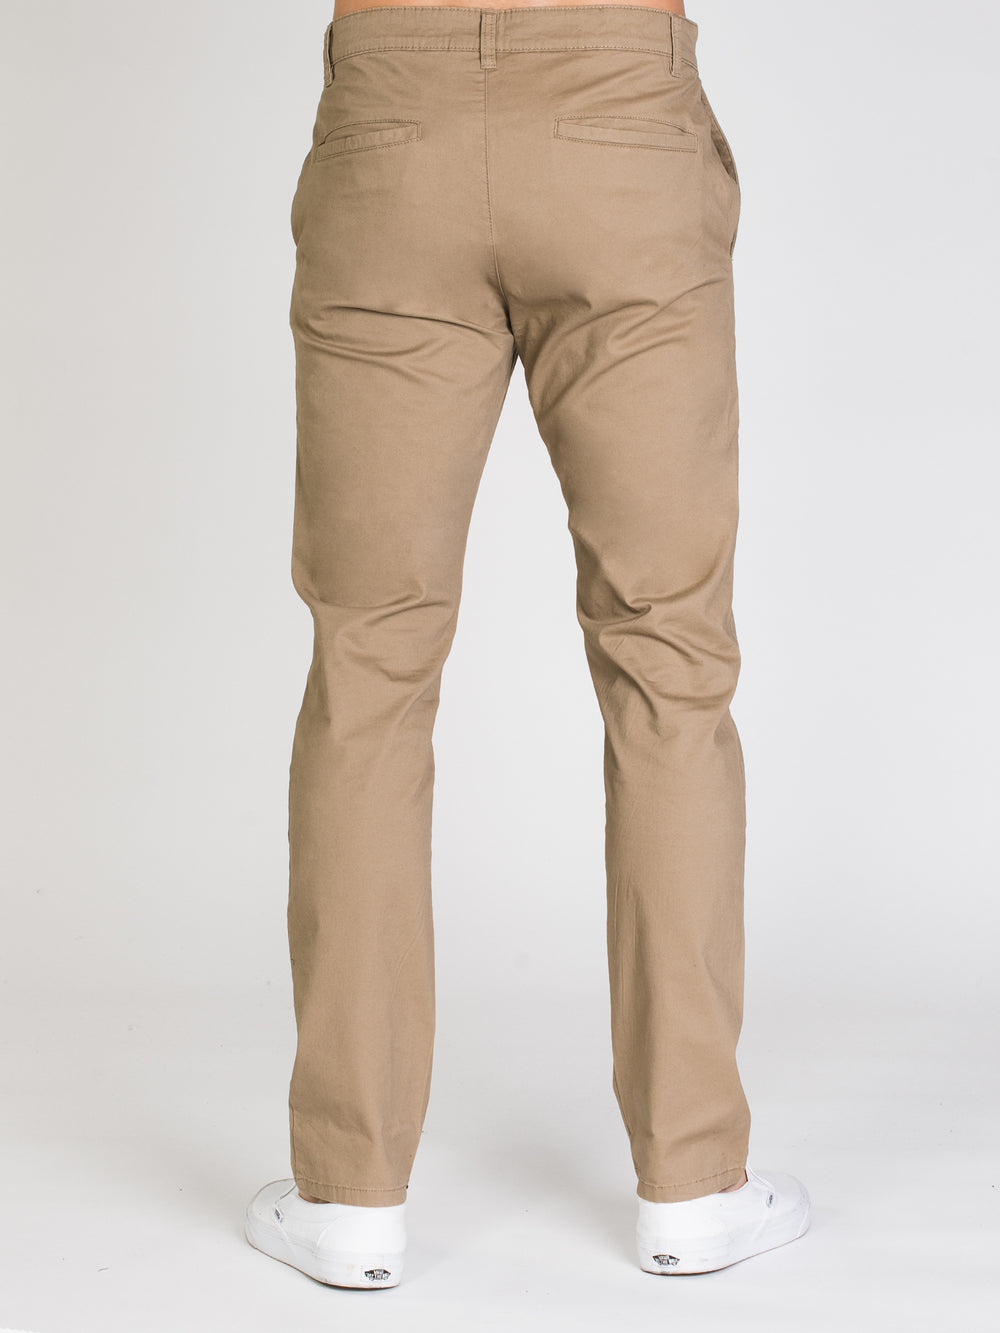 TAINTED SLIM CHINO - WHEAT - CLEARANCE